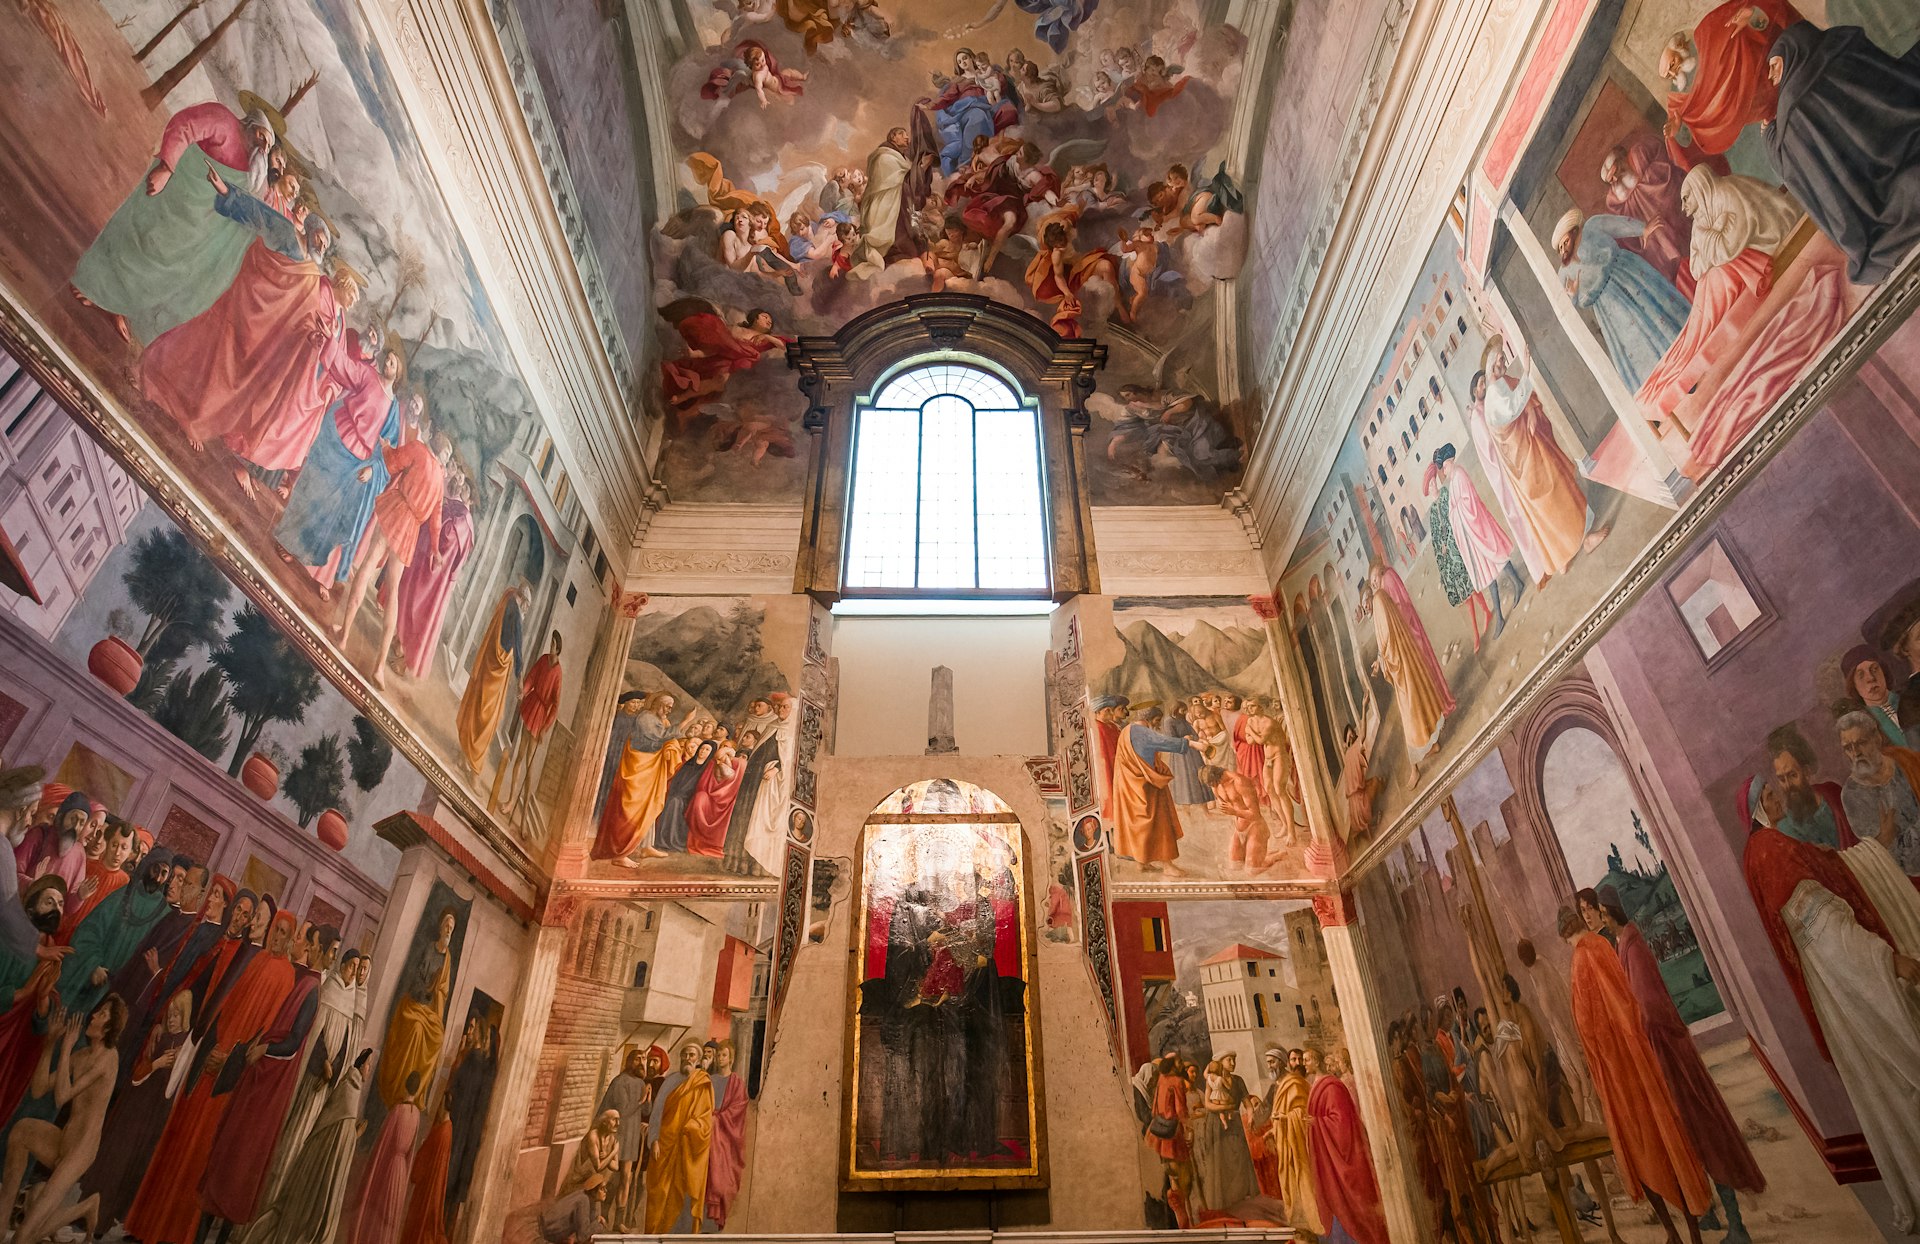 Looking up at walls with frescoes by Masaccio, Masolino and Filippo Lippi in the Brancacci Chapel